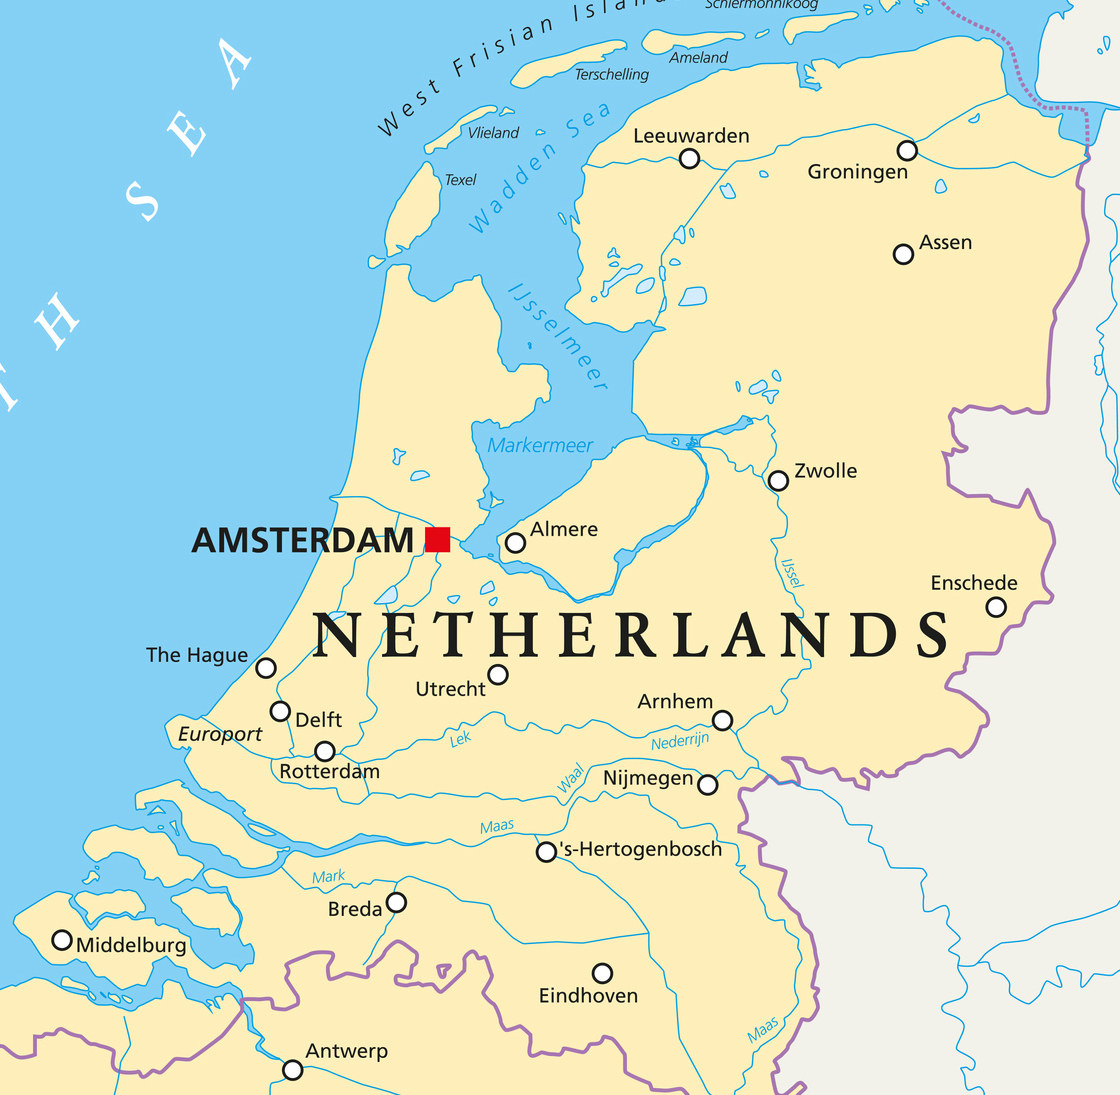 A map of the Netherlands